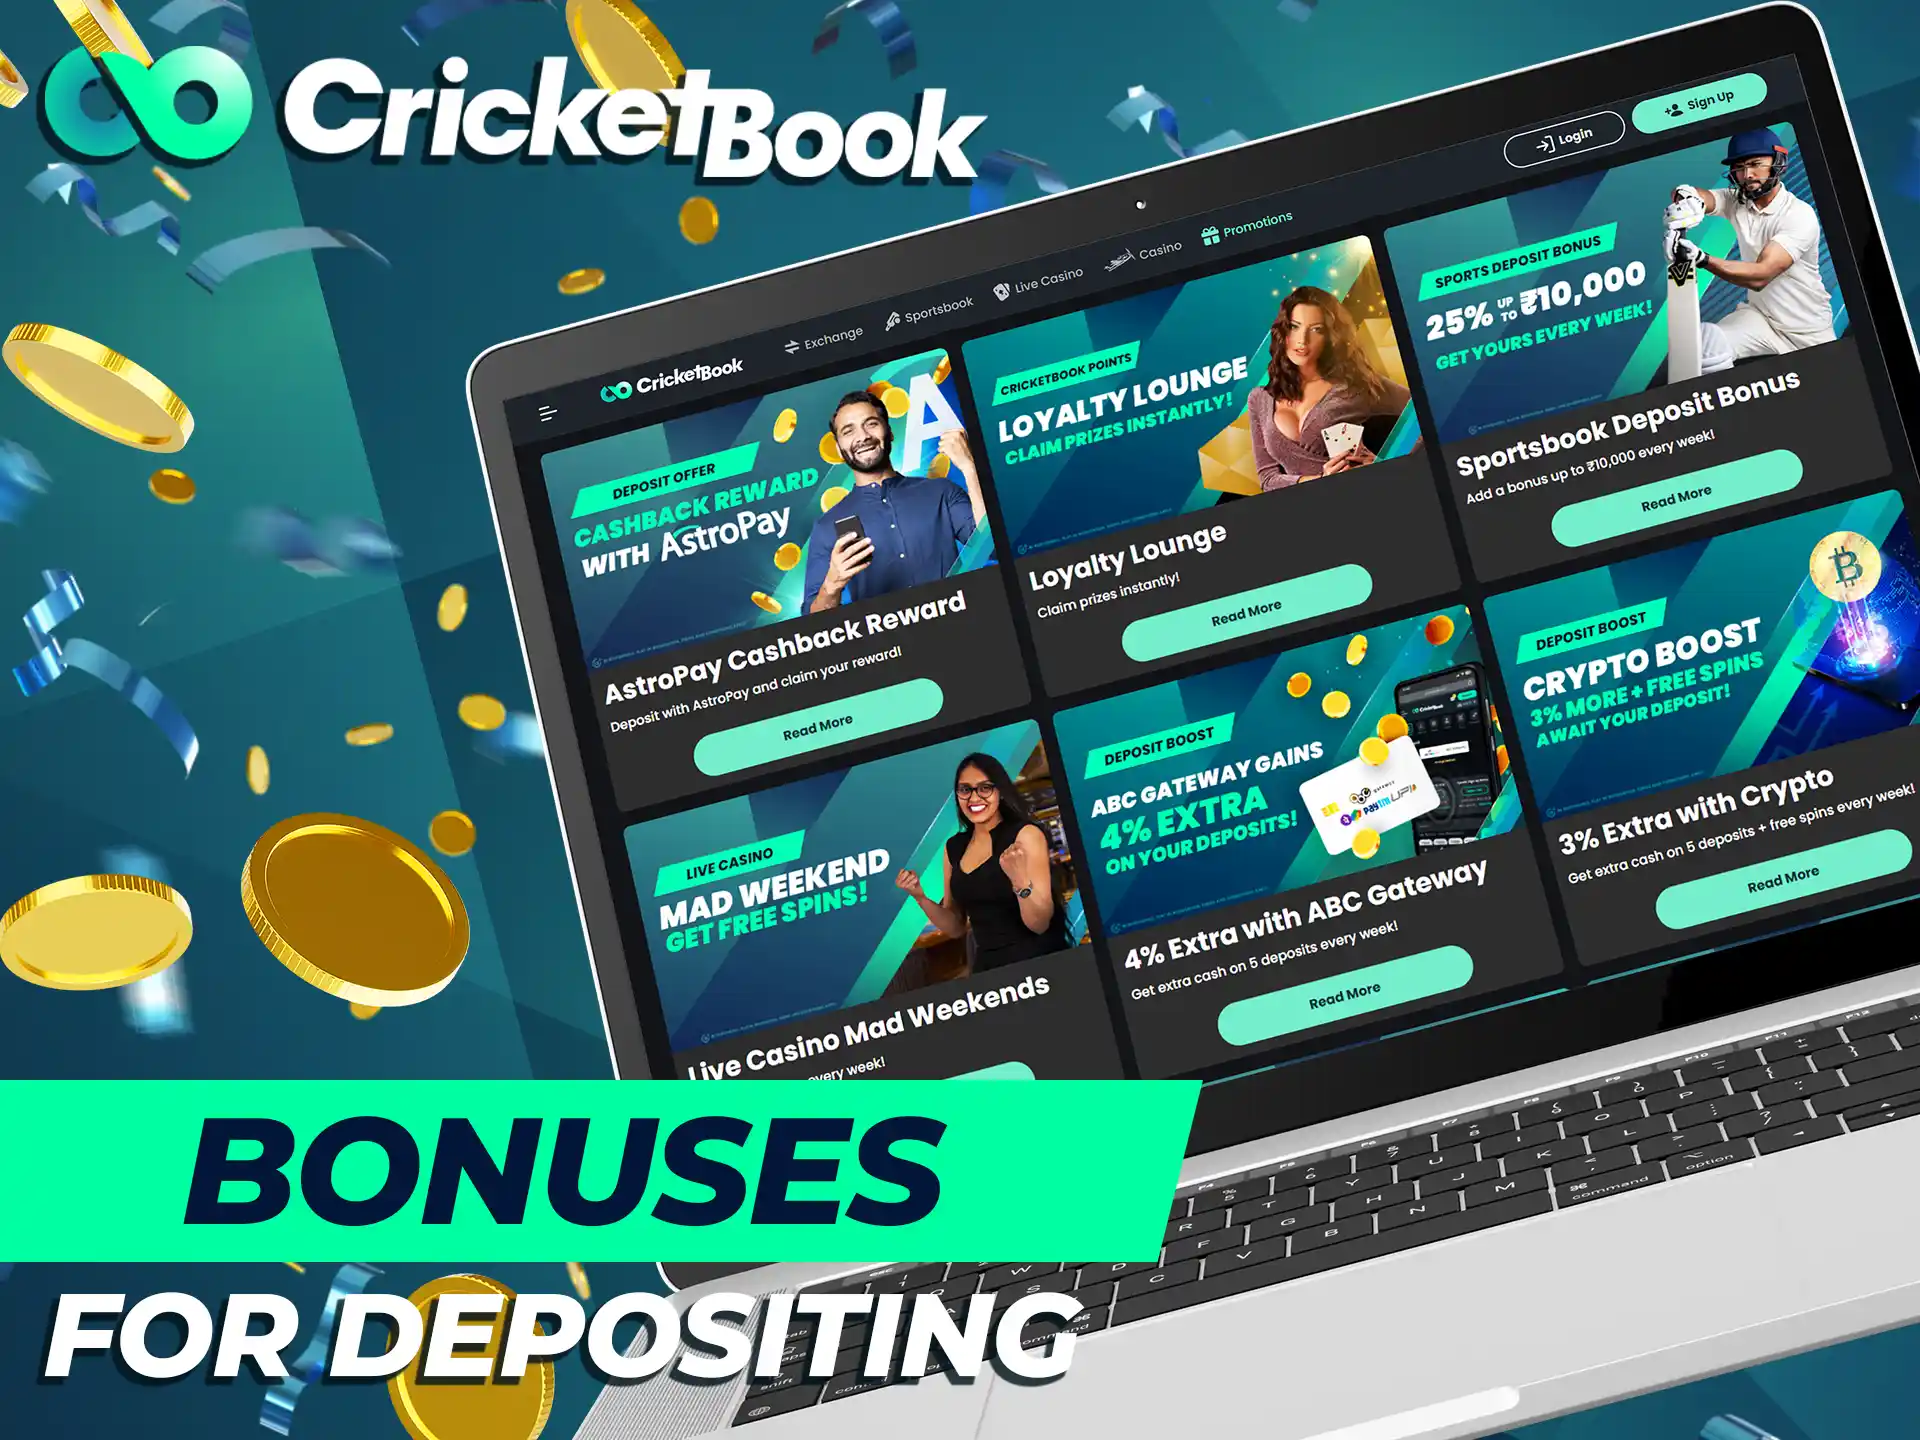 When you deposit to your CricketBook account, you can choose a bonus.